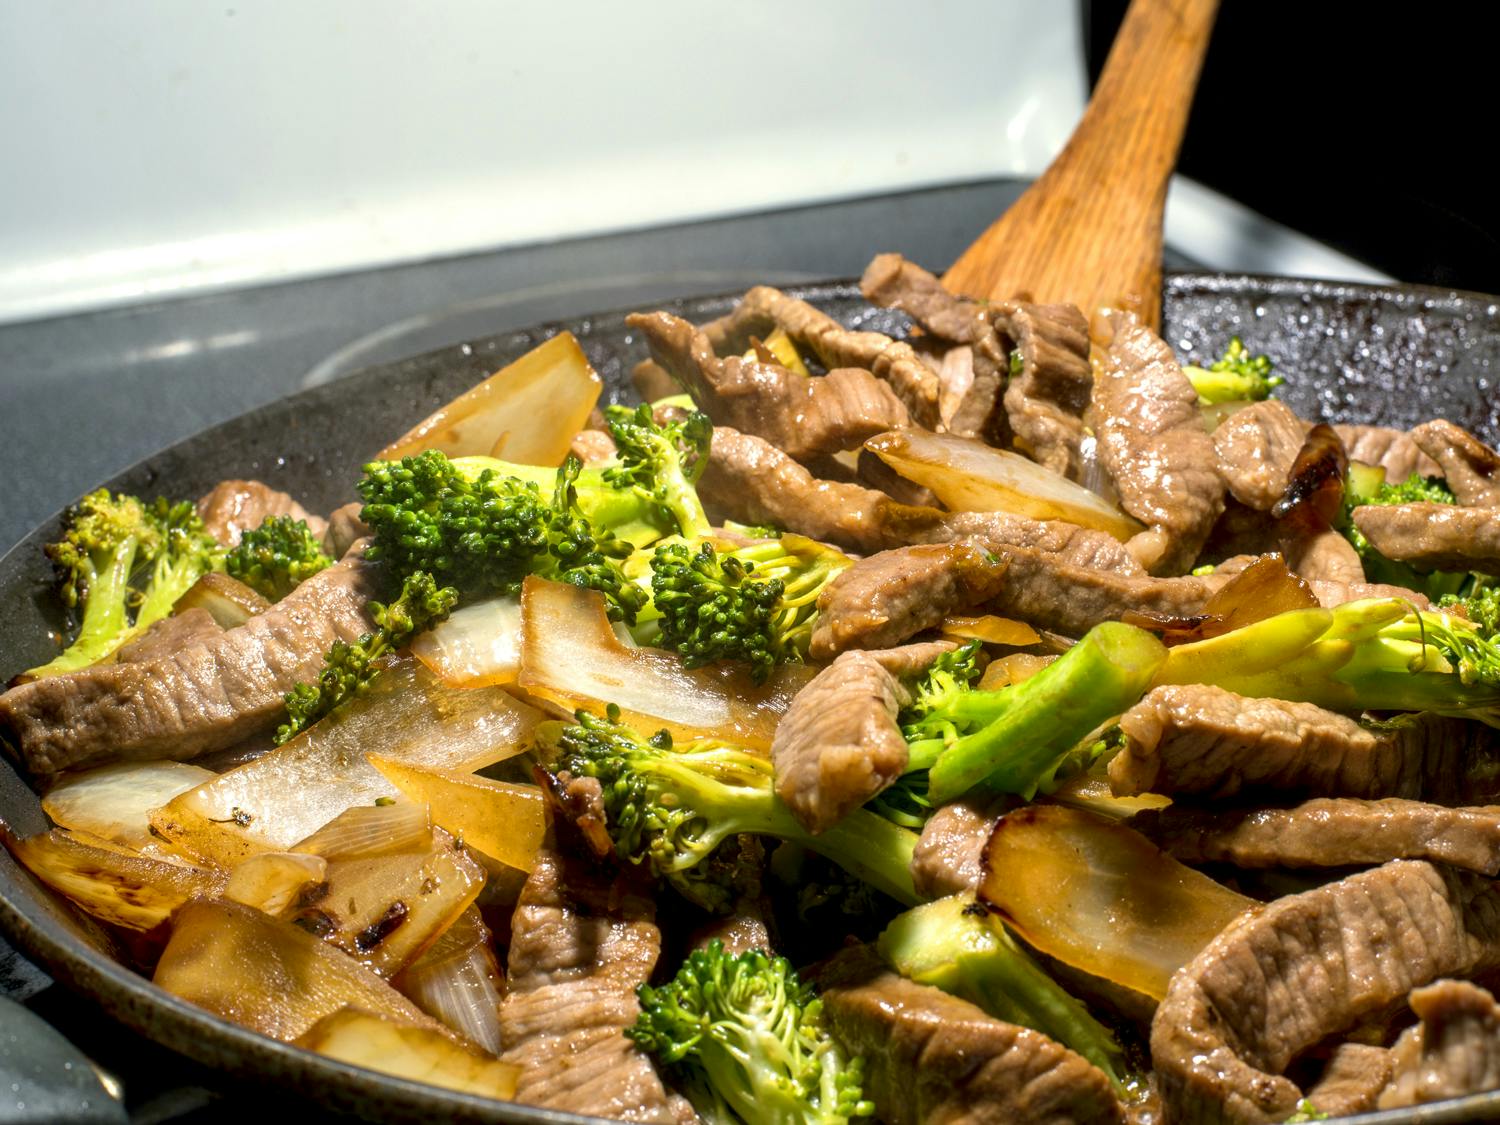 Skillet Beef and Broccoli recipe